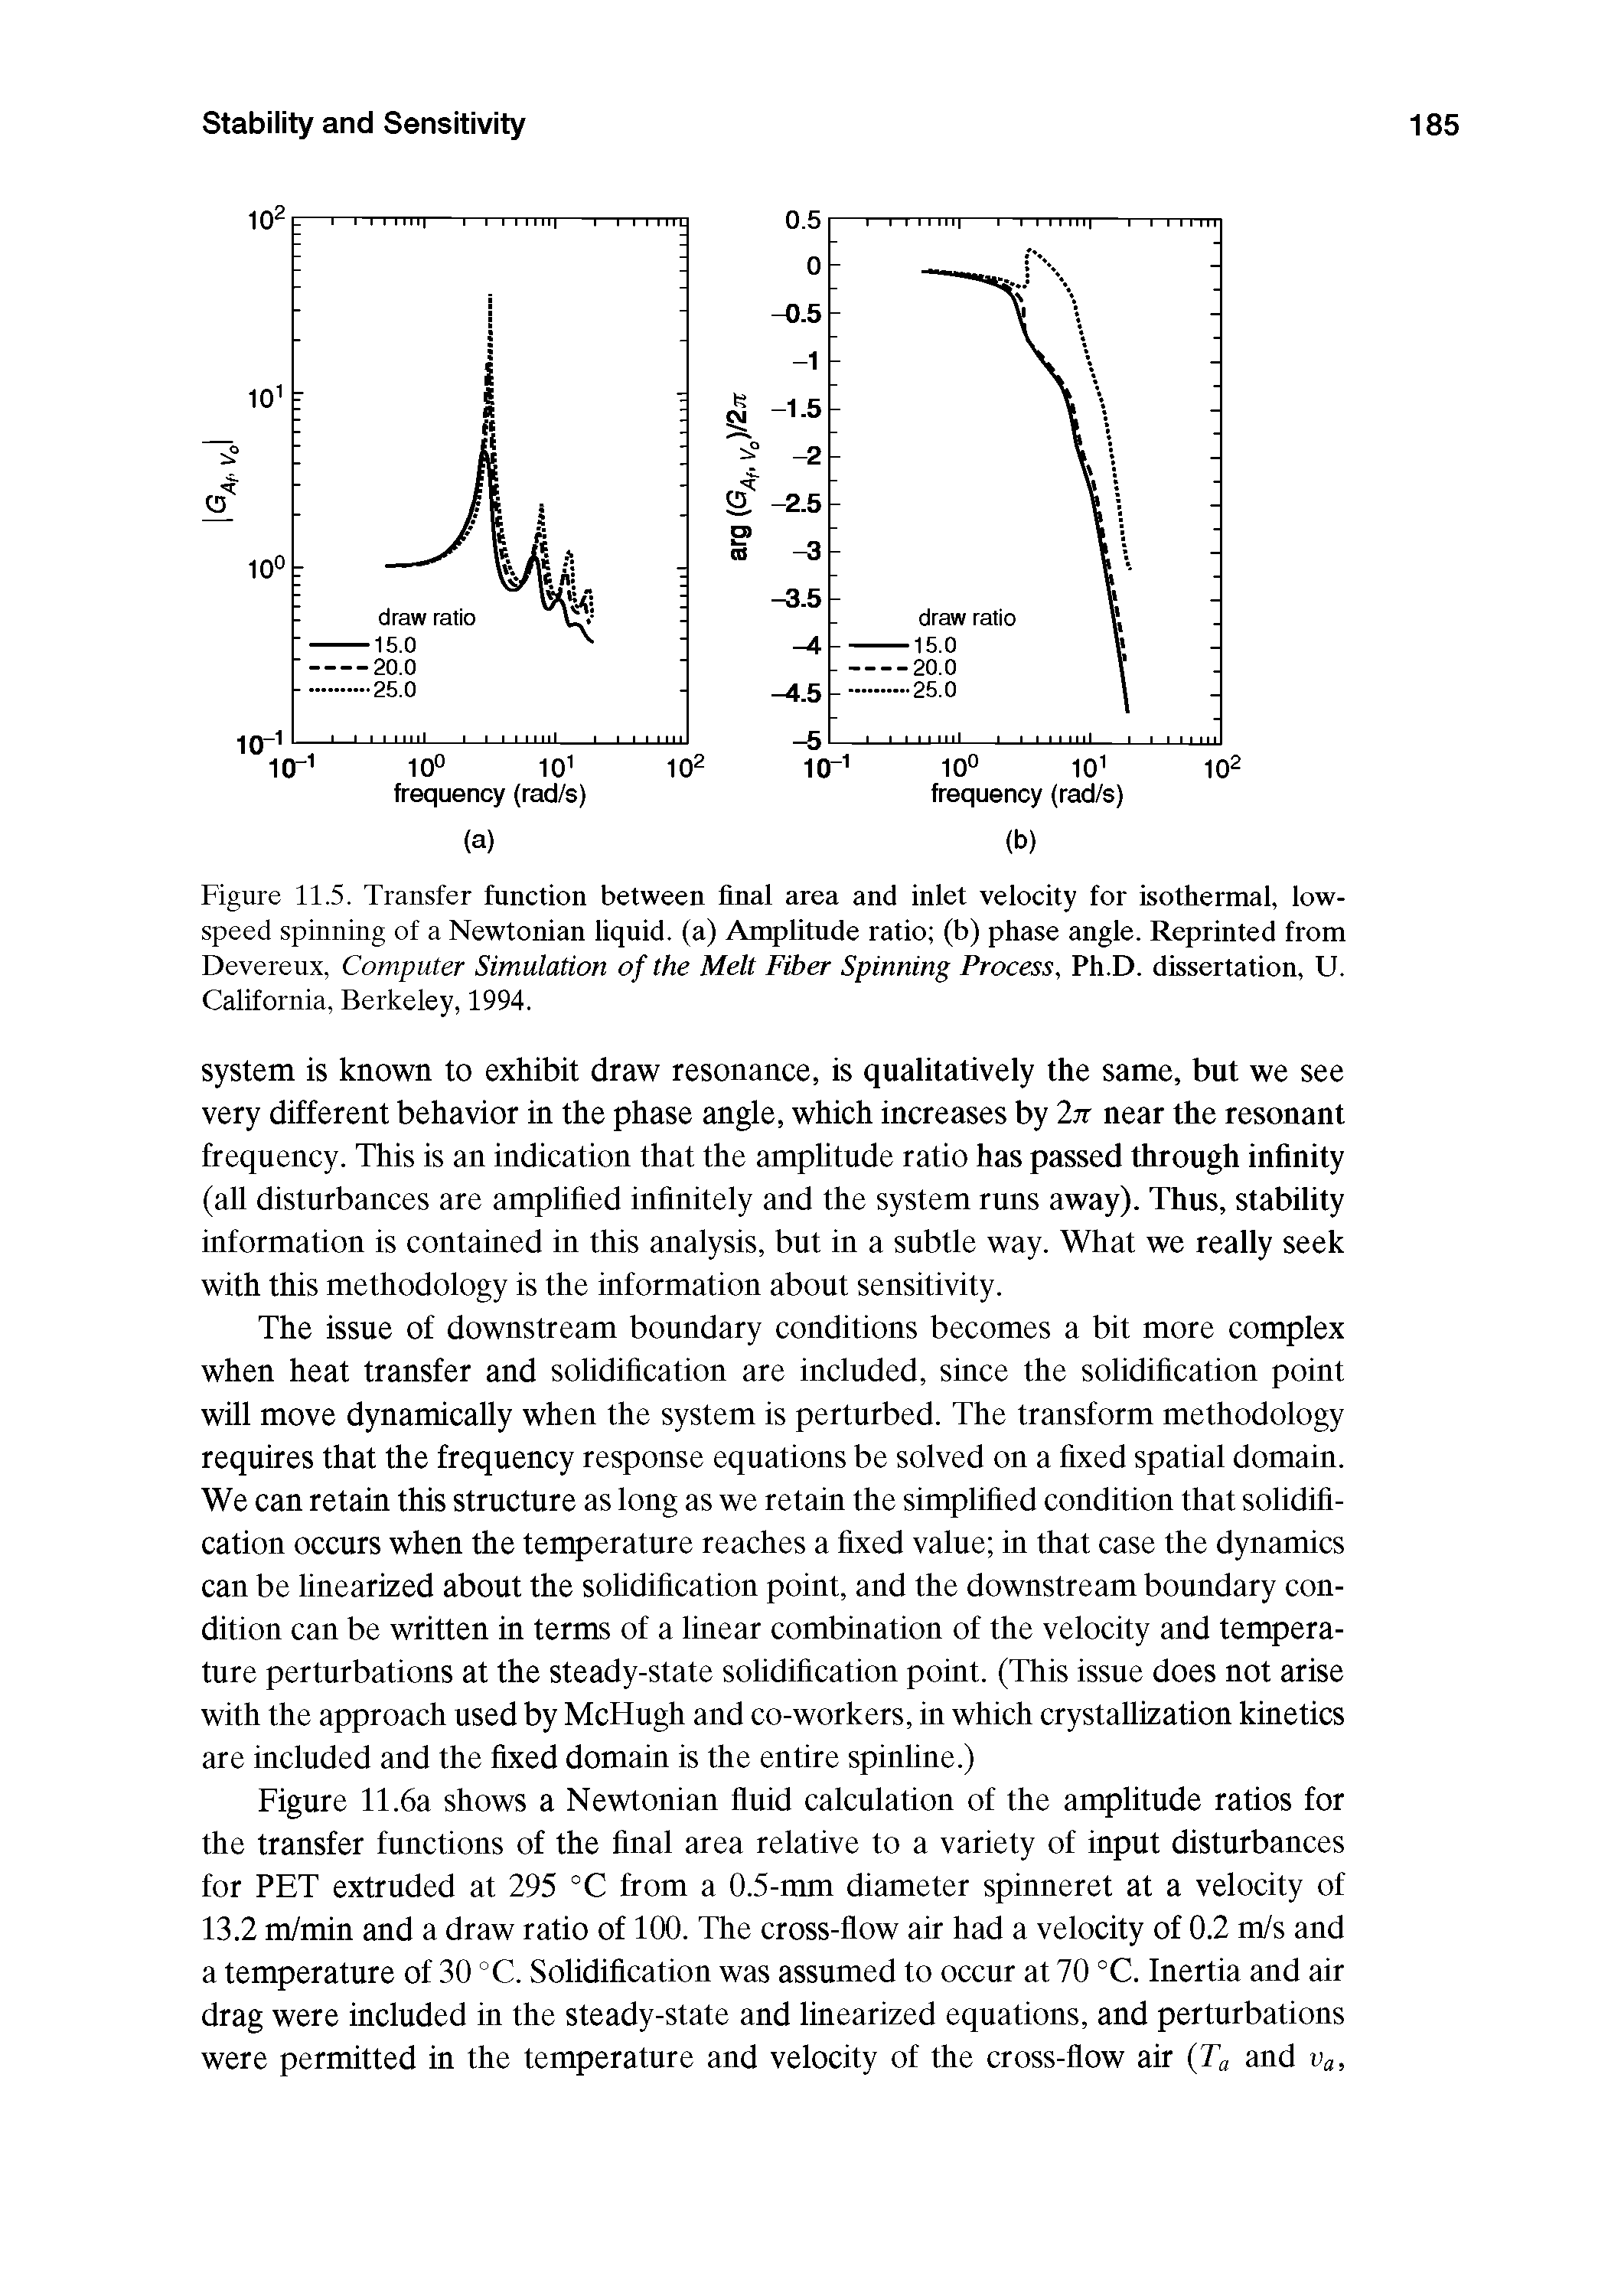 Figure 11.5. Transfer function between final area and inlet velocity for isothermal, low-speed spinning of a Newtonian liqnid. (a) Amplitude ratio (b) phase angle. Reprinted from Devereux, Computer Simulation of the Melt Fiber Spinning Process, Ph.D. dissertation, U. California, Berkeley, 1994.